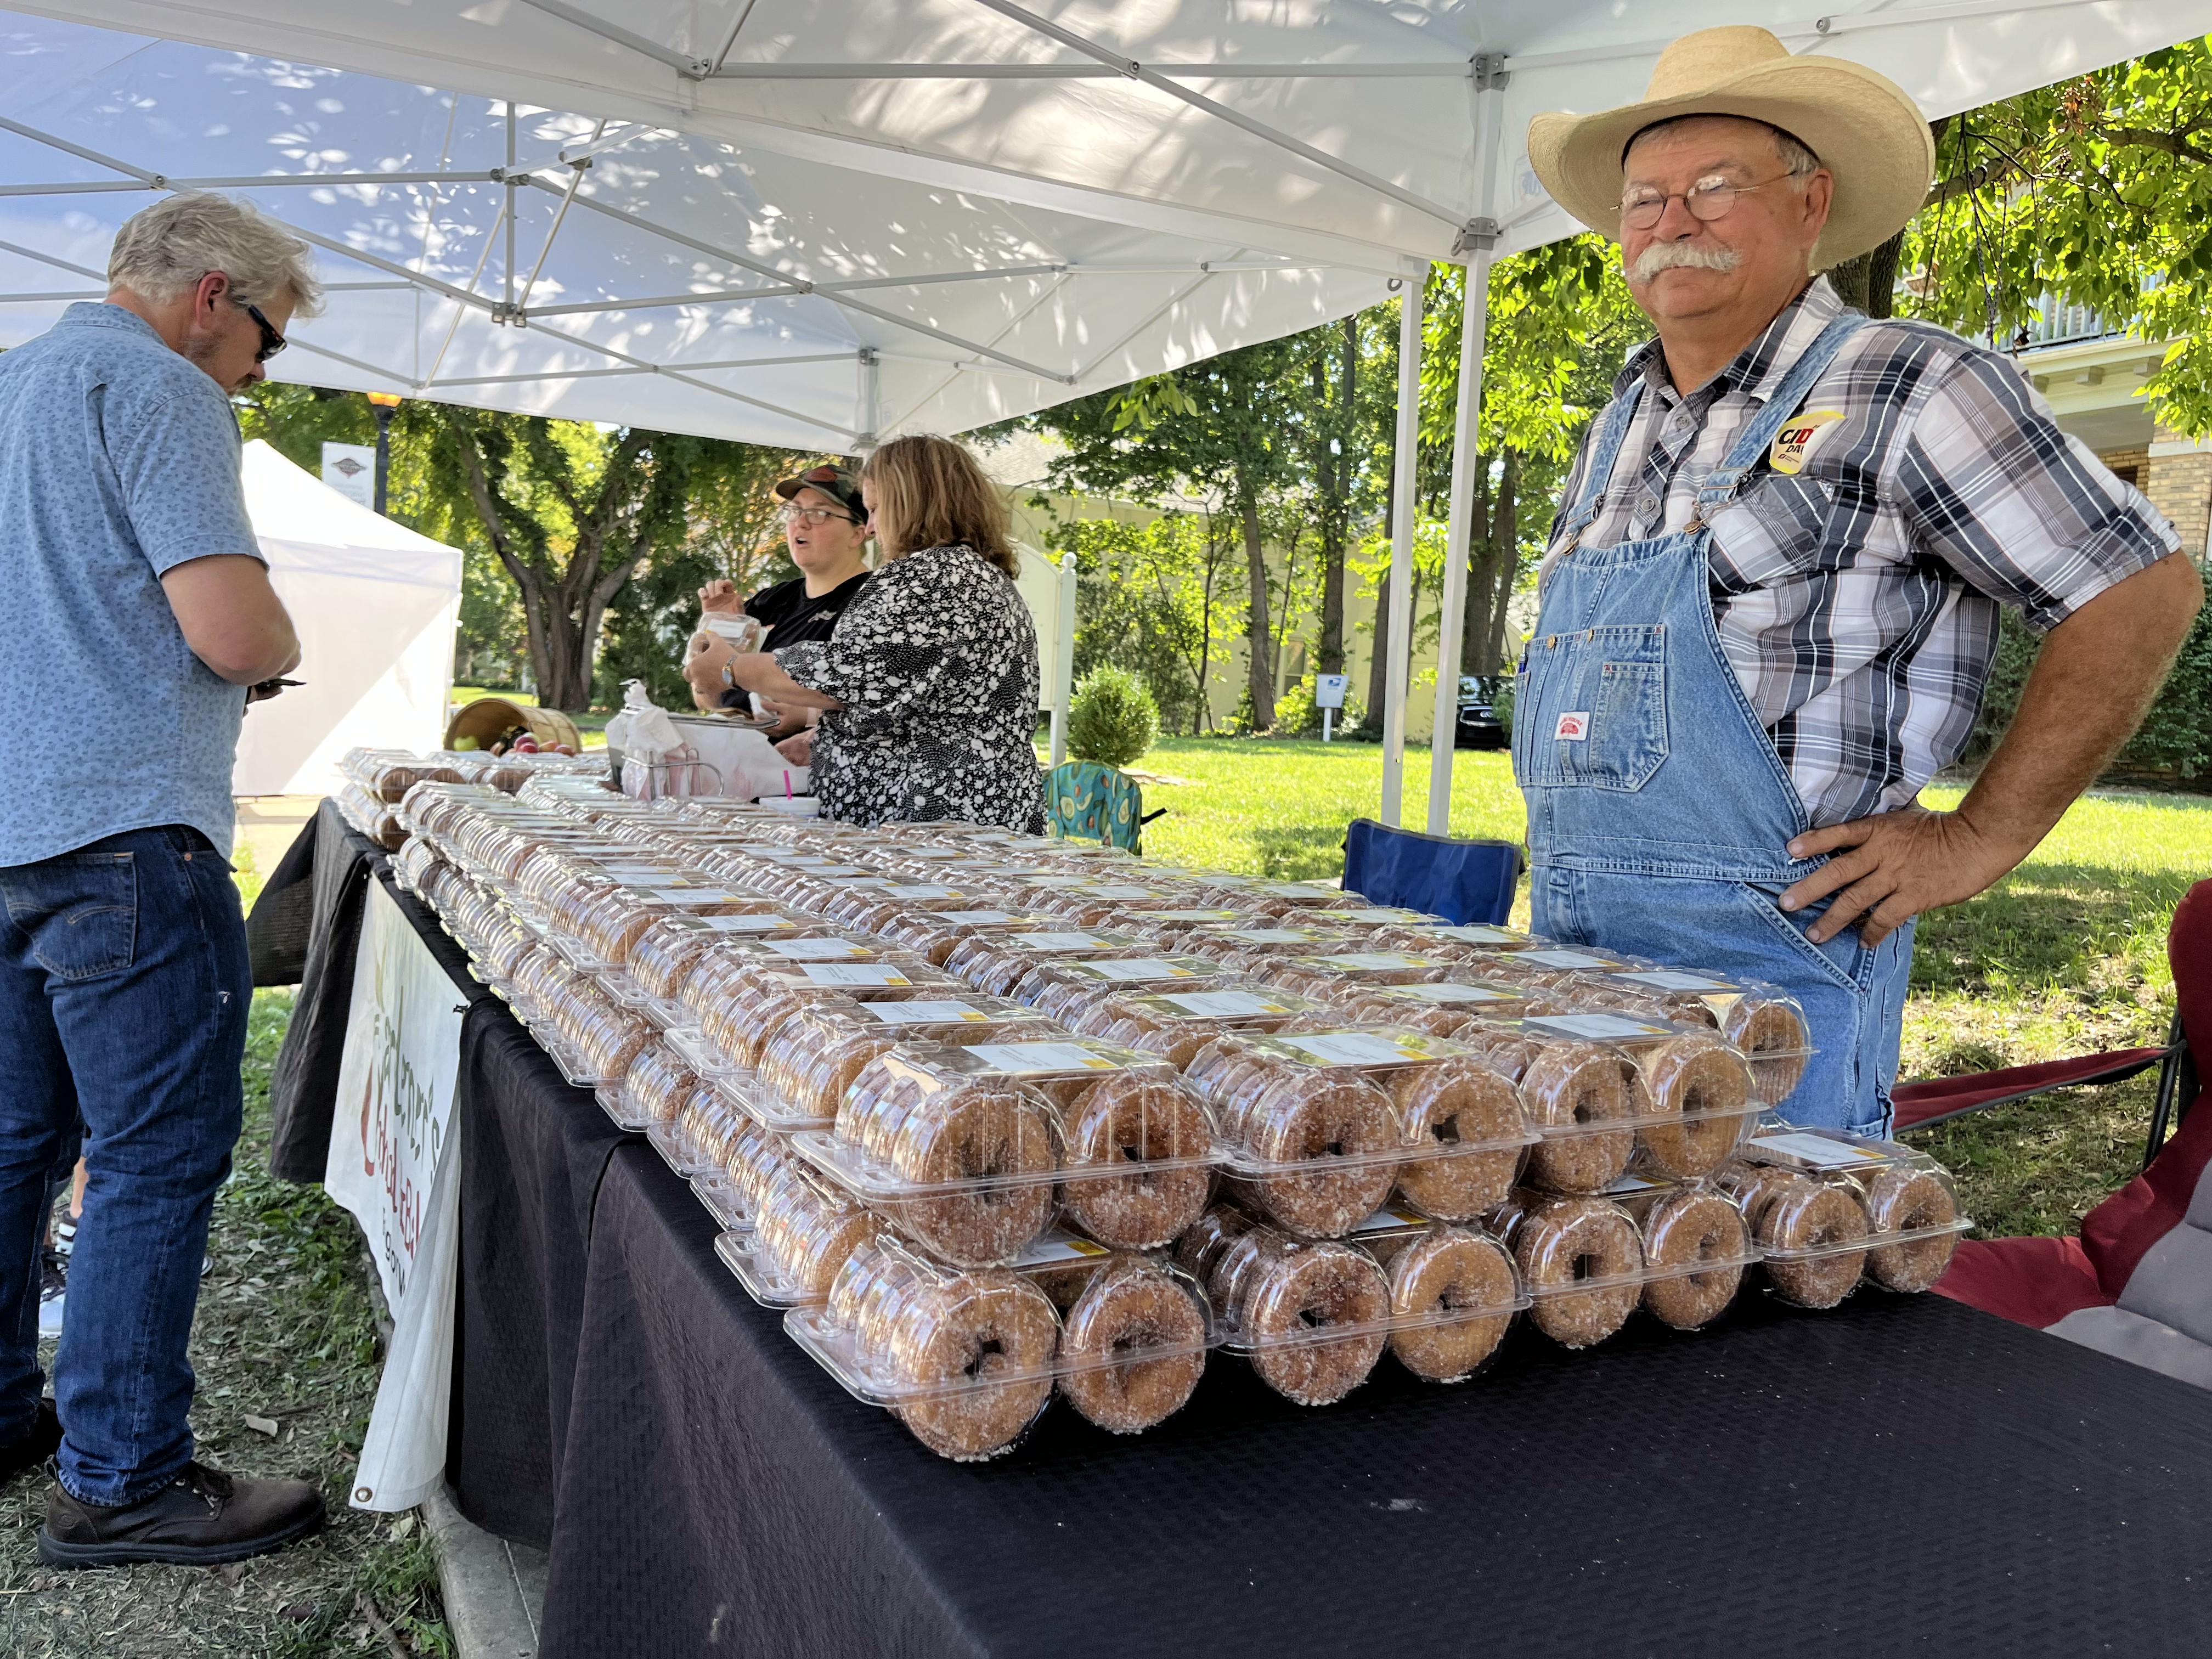 A man stands behind a table holding containers of apple cider donuts